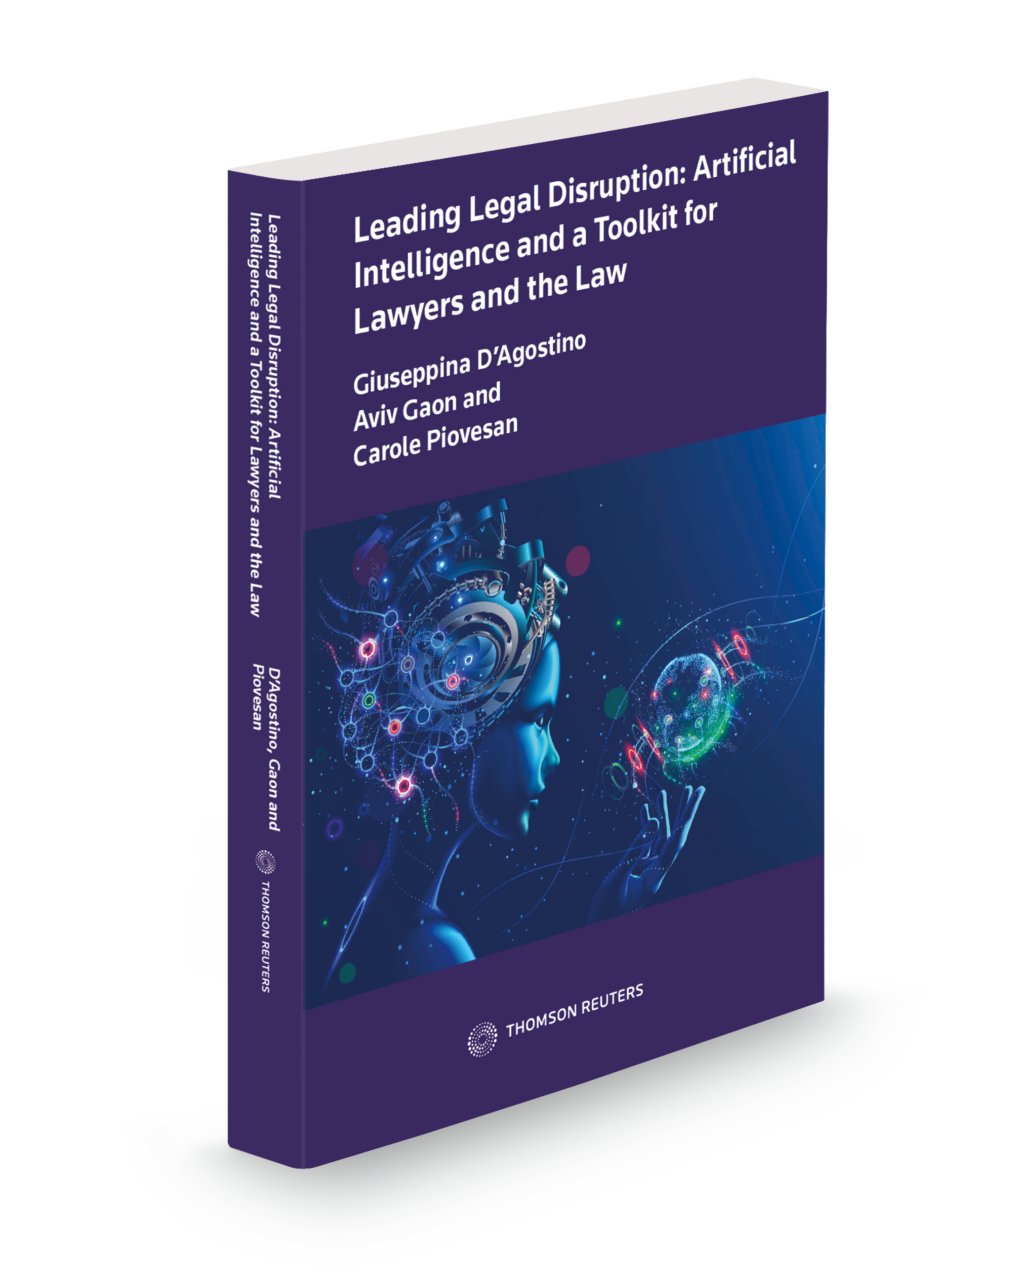 Cover of Leading Legal Disruption: Artificial Intelligence And A Toolkit For Lawyers And The Law, Softbound book